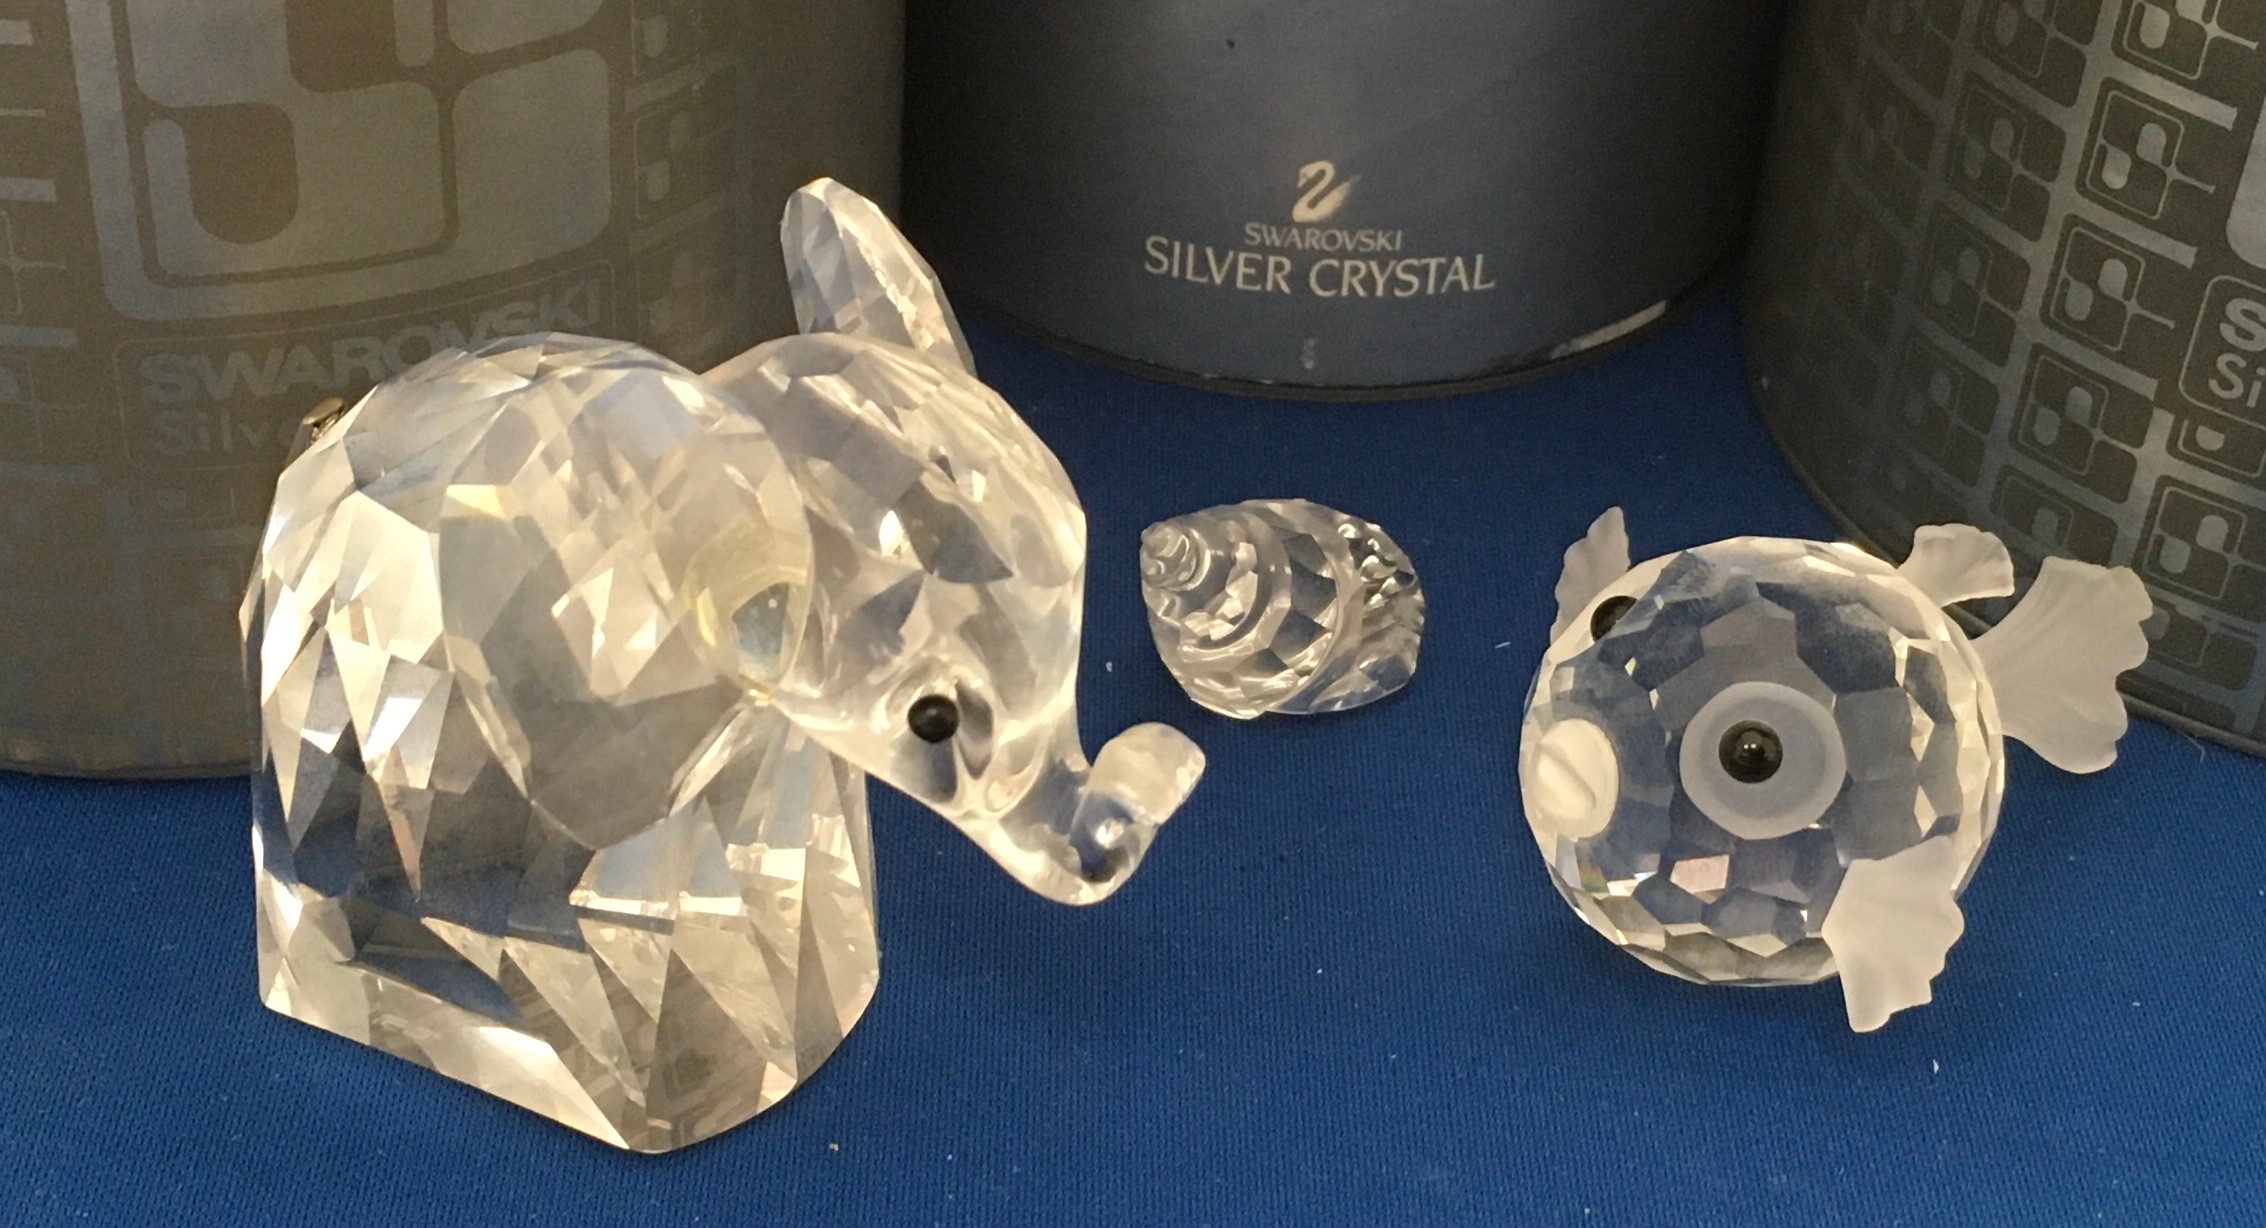 Swarovski silver crystal figures Conch Shell 191691, Water Lily 7600nr124, Large elephant 010015, - Image 3 of 3